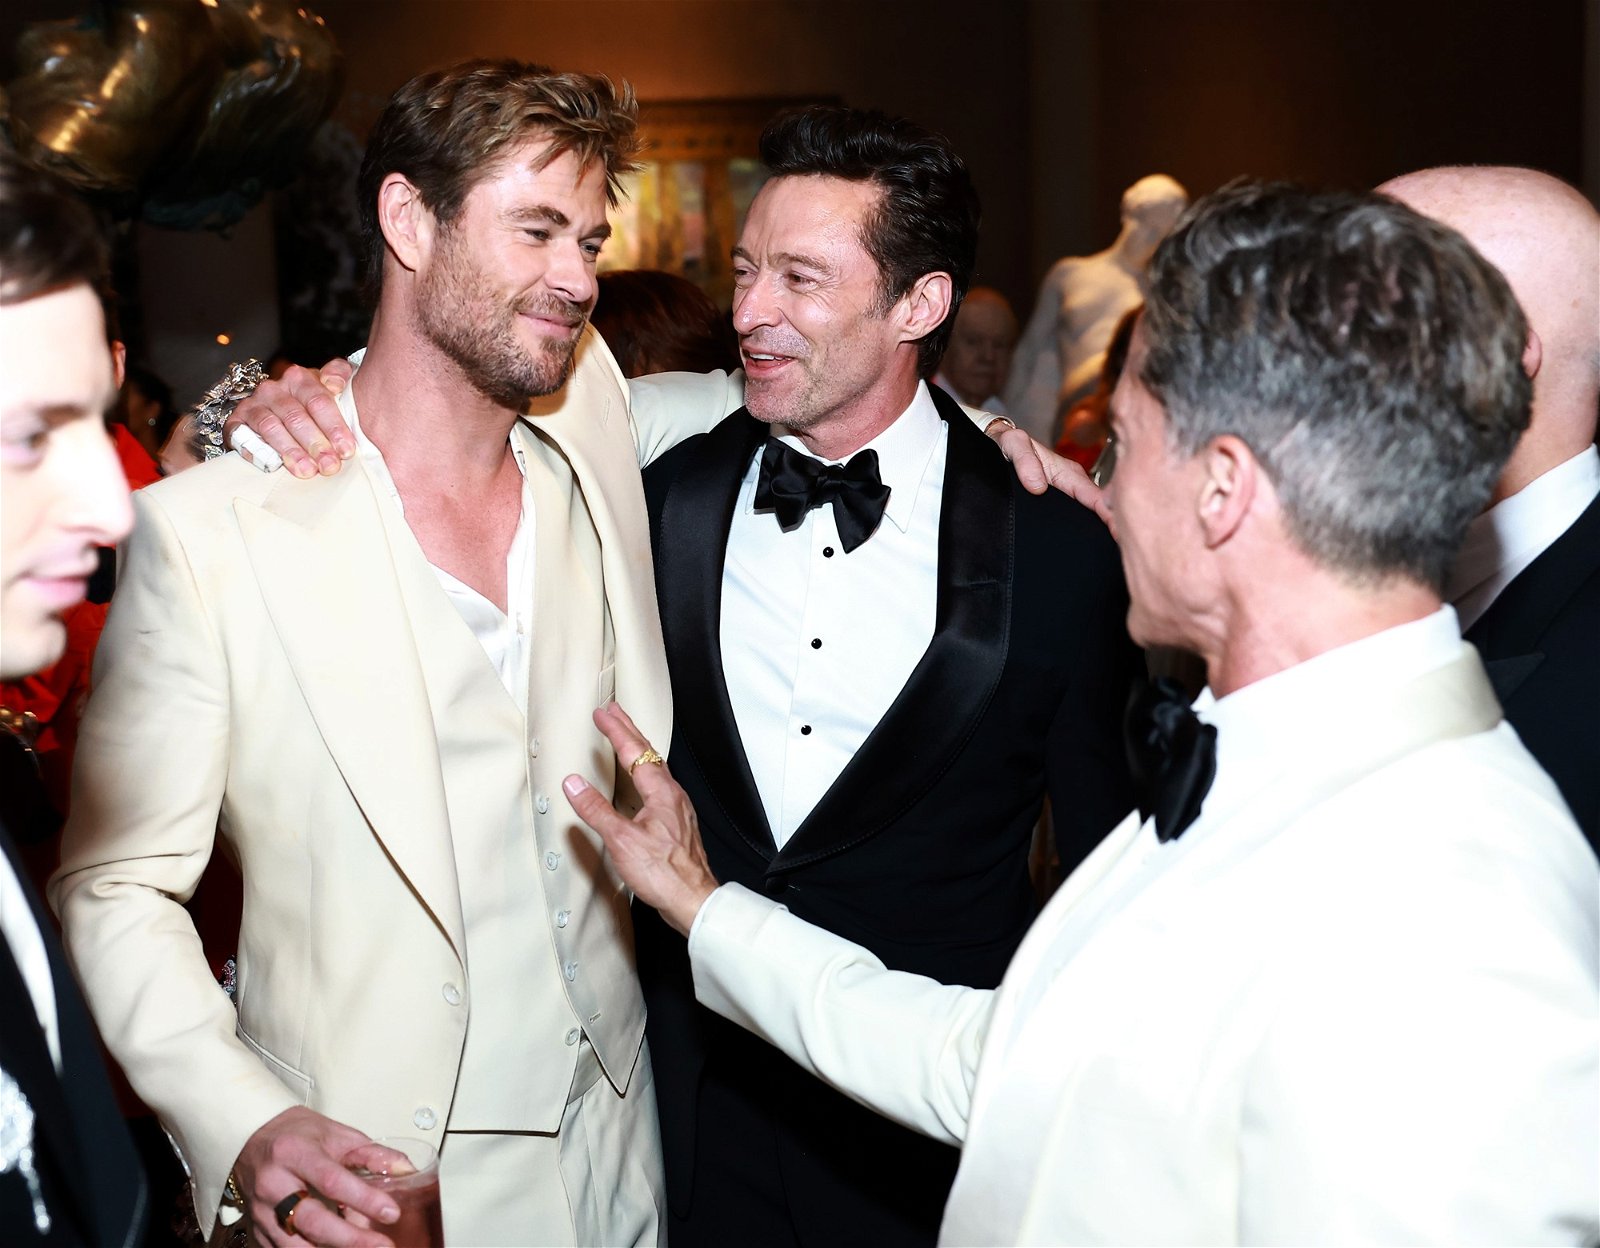 Chris and Hugh stand arm in arm as they talk with other men.